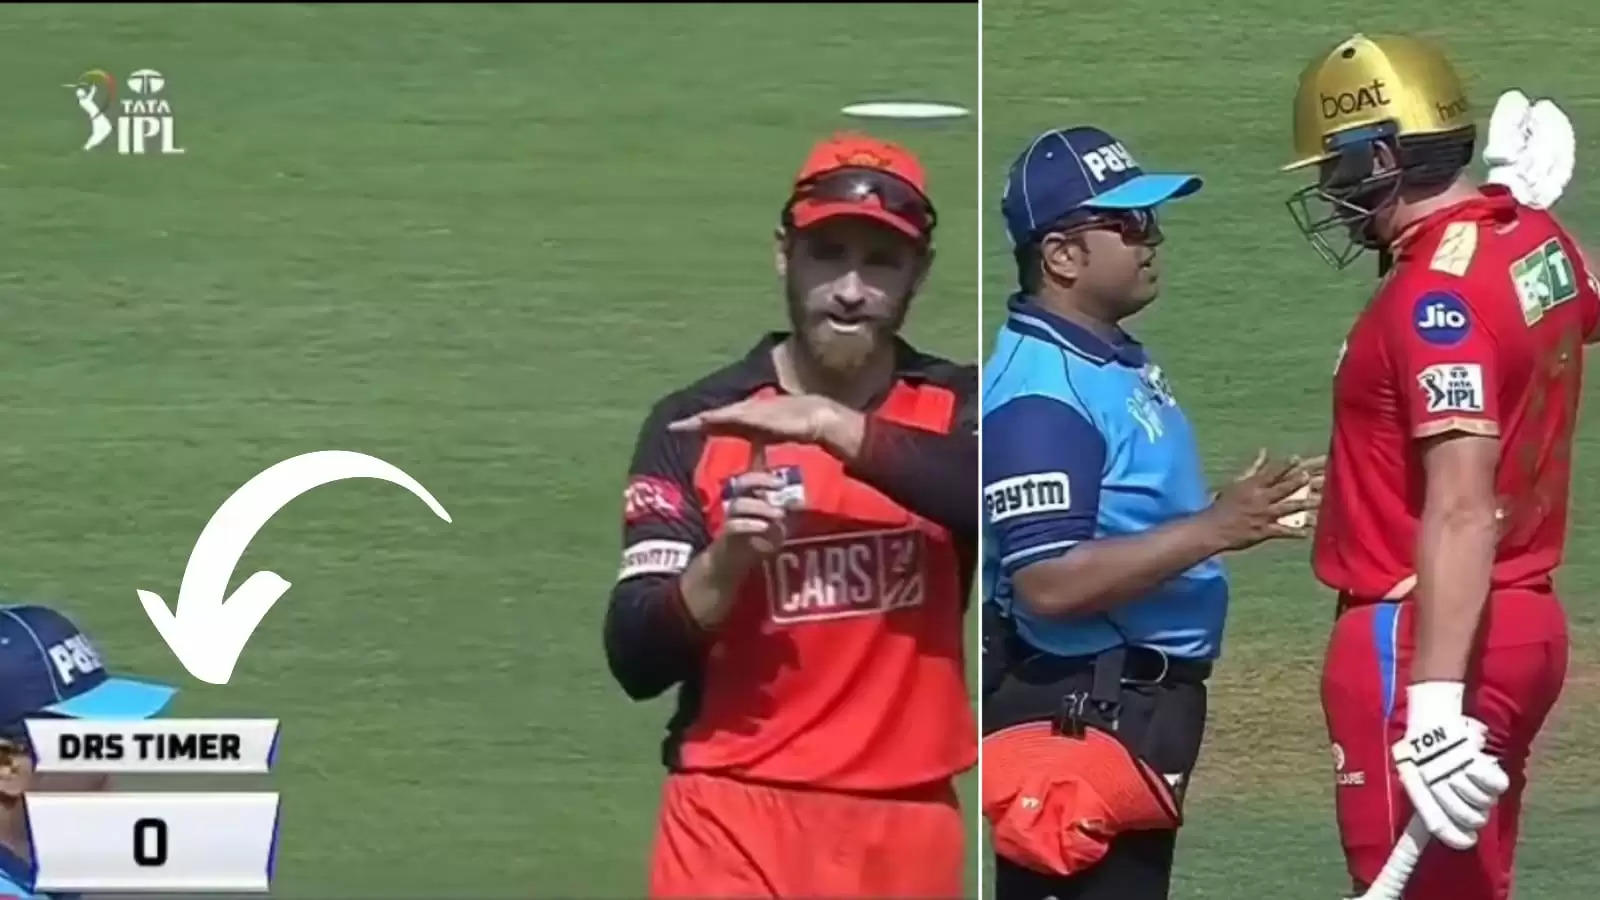 Jonny Bairstow told the umpire about the illegal SRH review. 